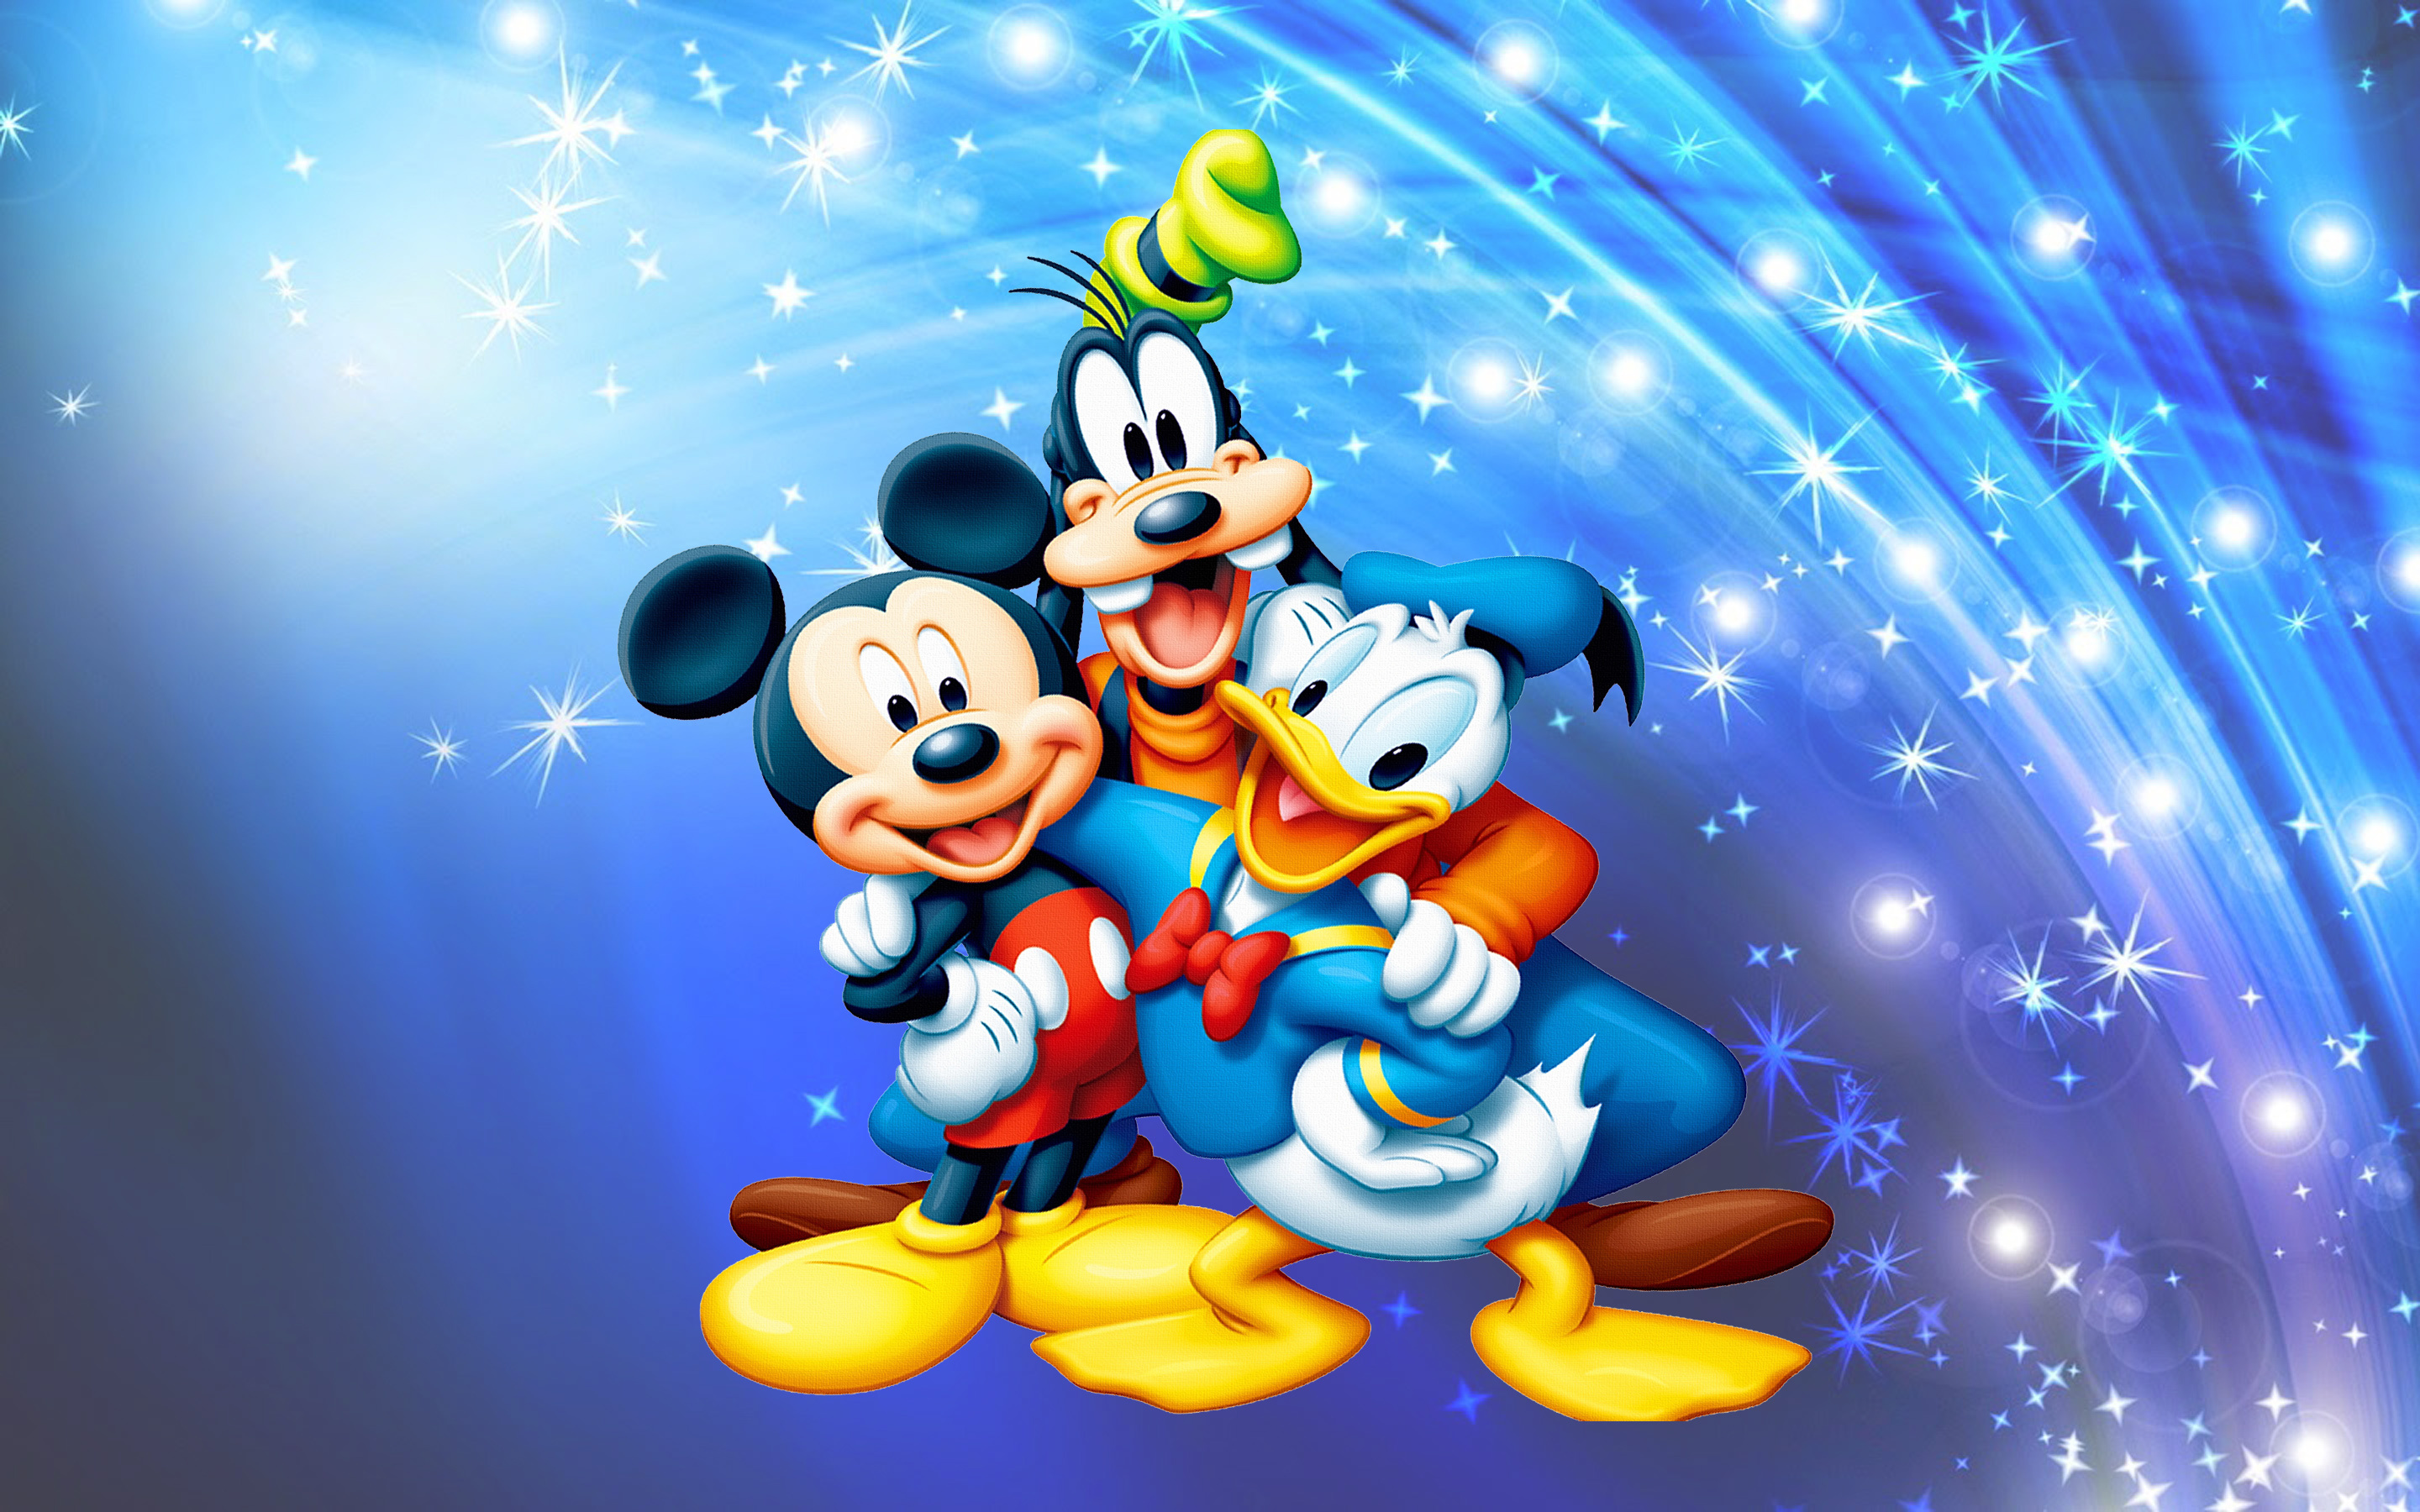 Donald Duck: Mickey Mouse's friend, Earned a star on the Hollywood Walk of Fame, Pluto. 2880x1800 HD Wallpaper.